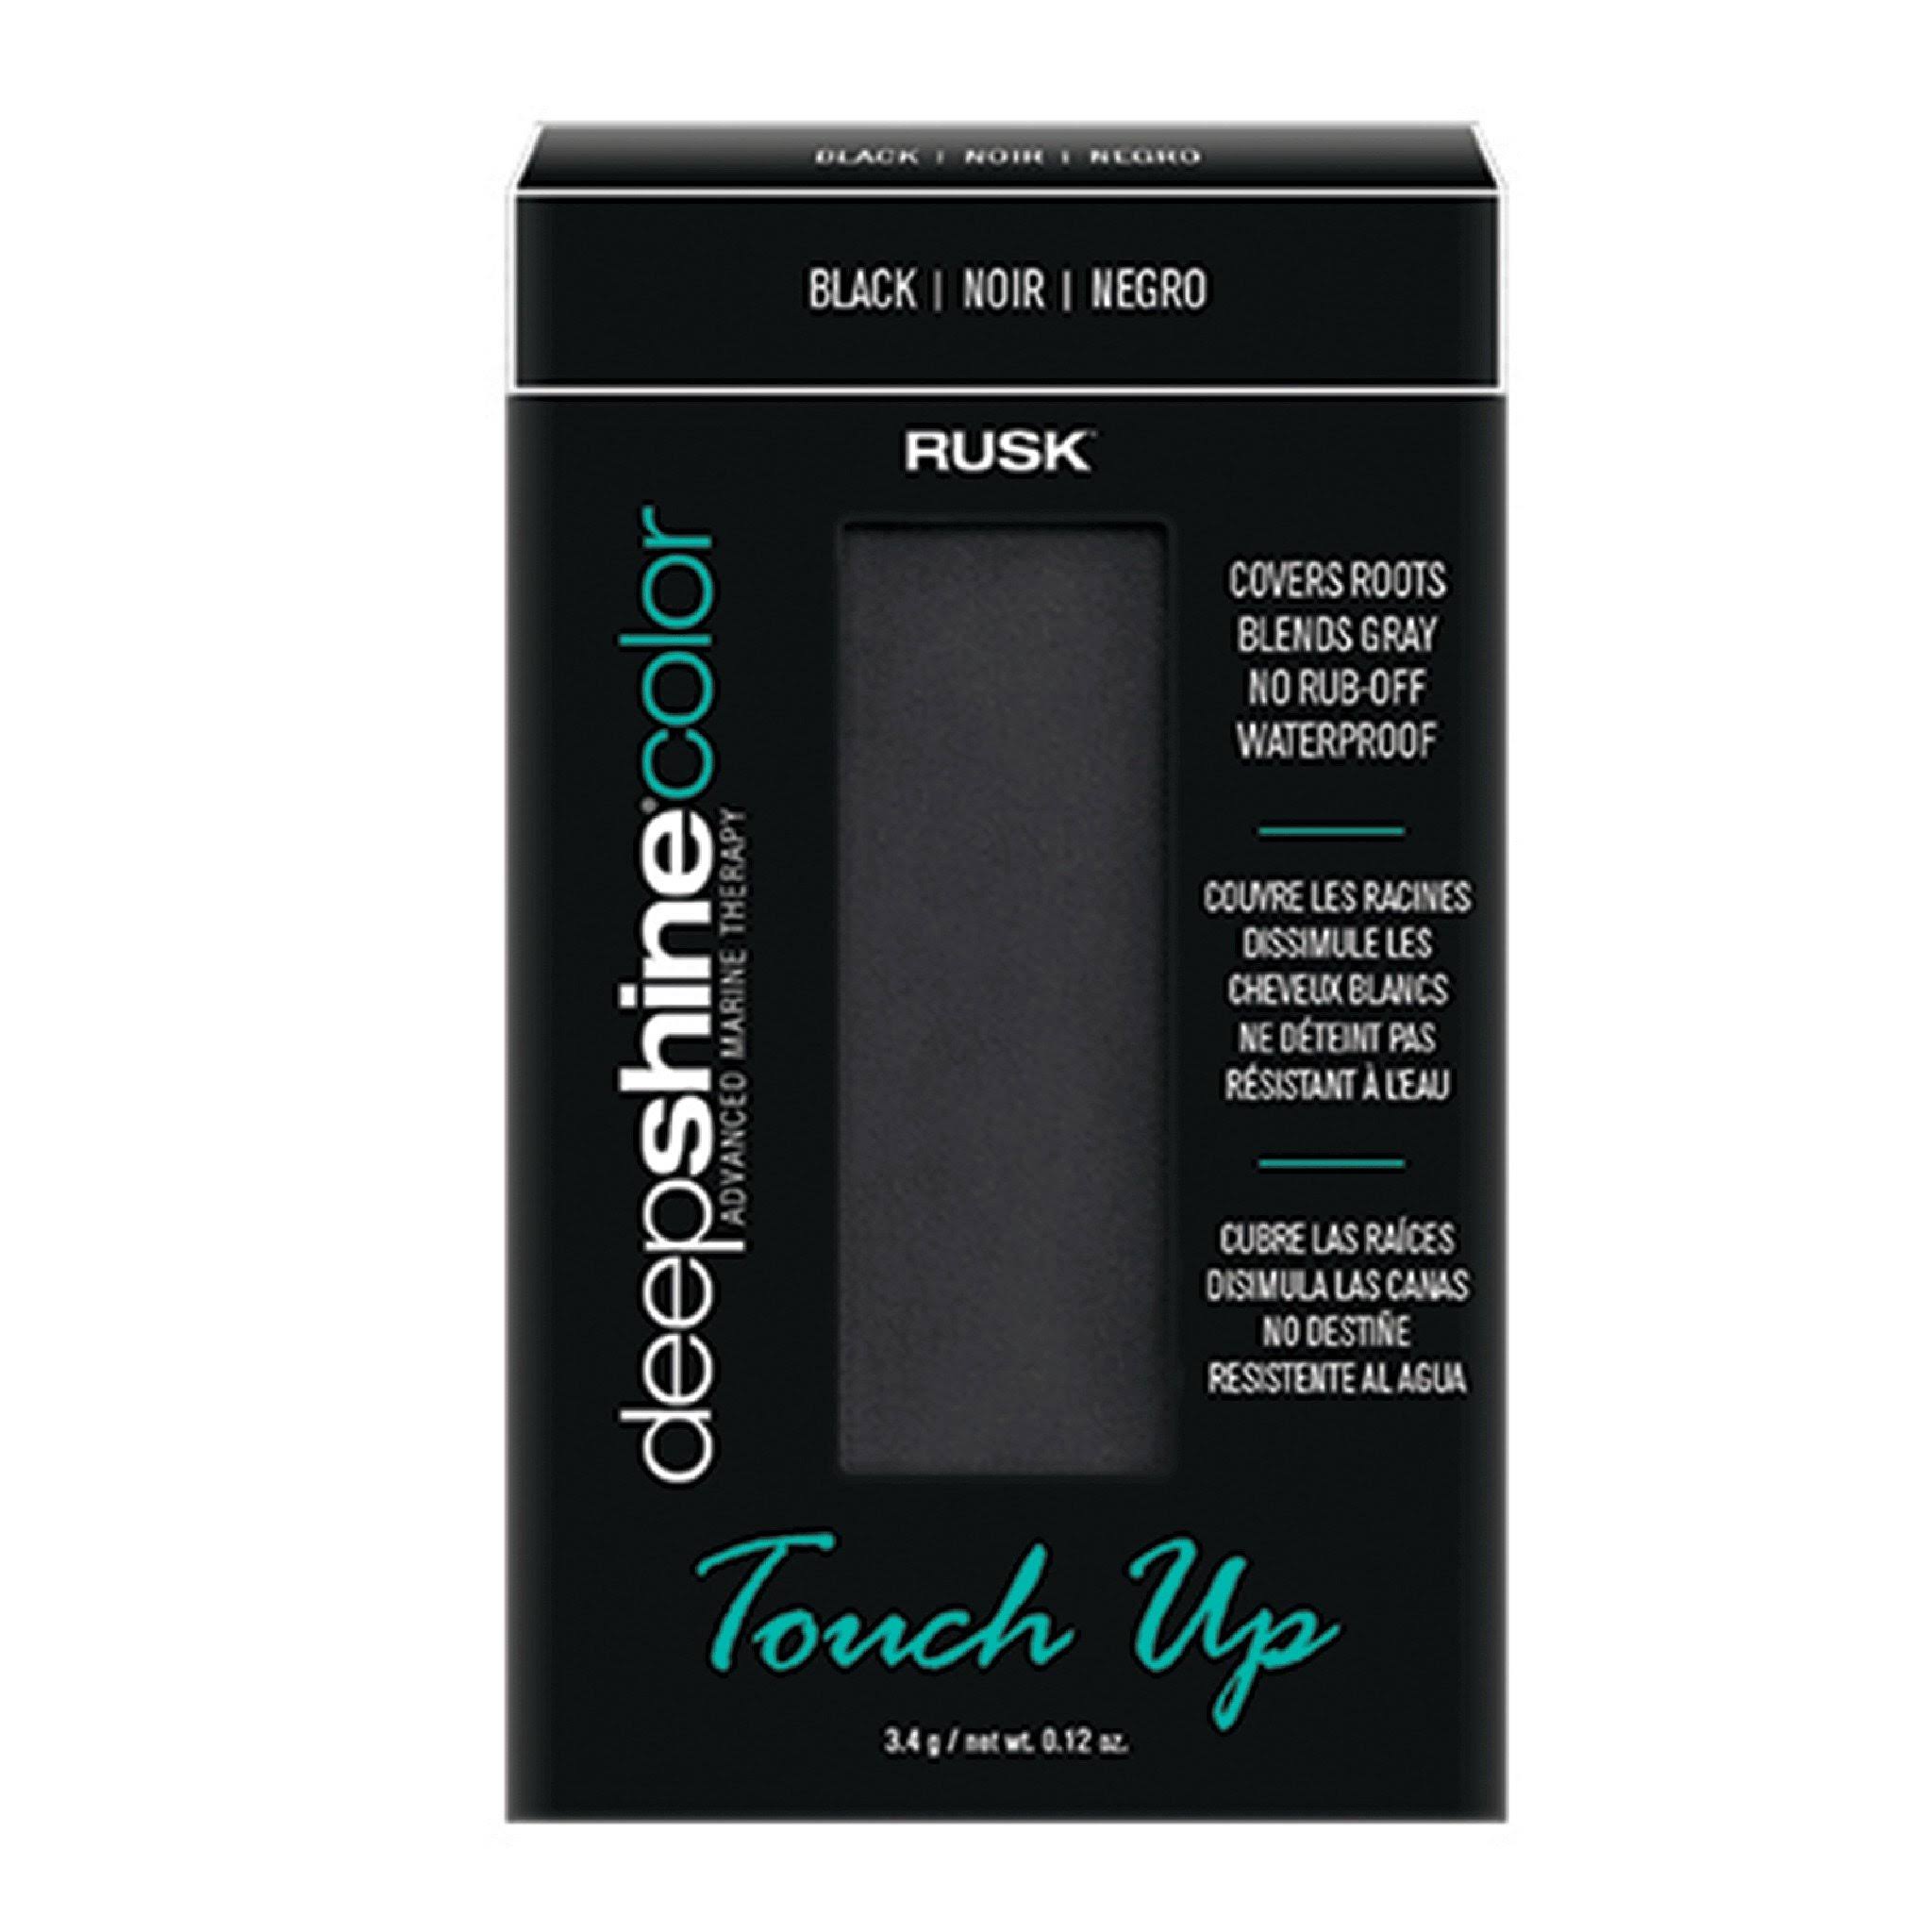 Rusk Deepshine Color Touch Up Refill 0.12 oz - Black